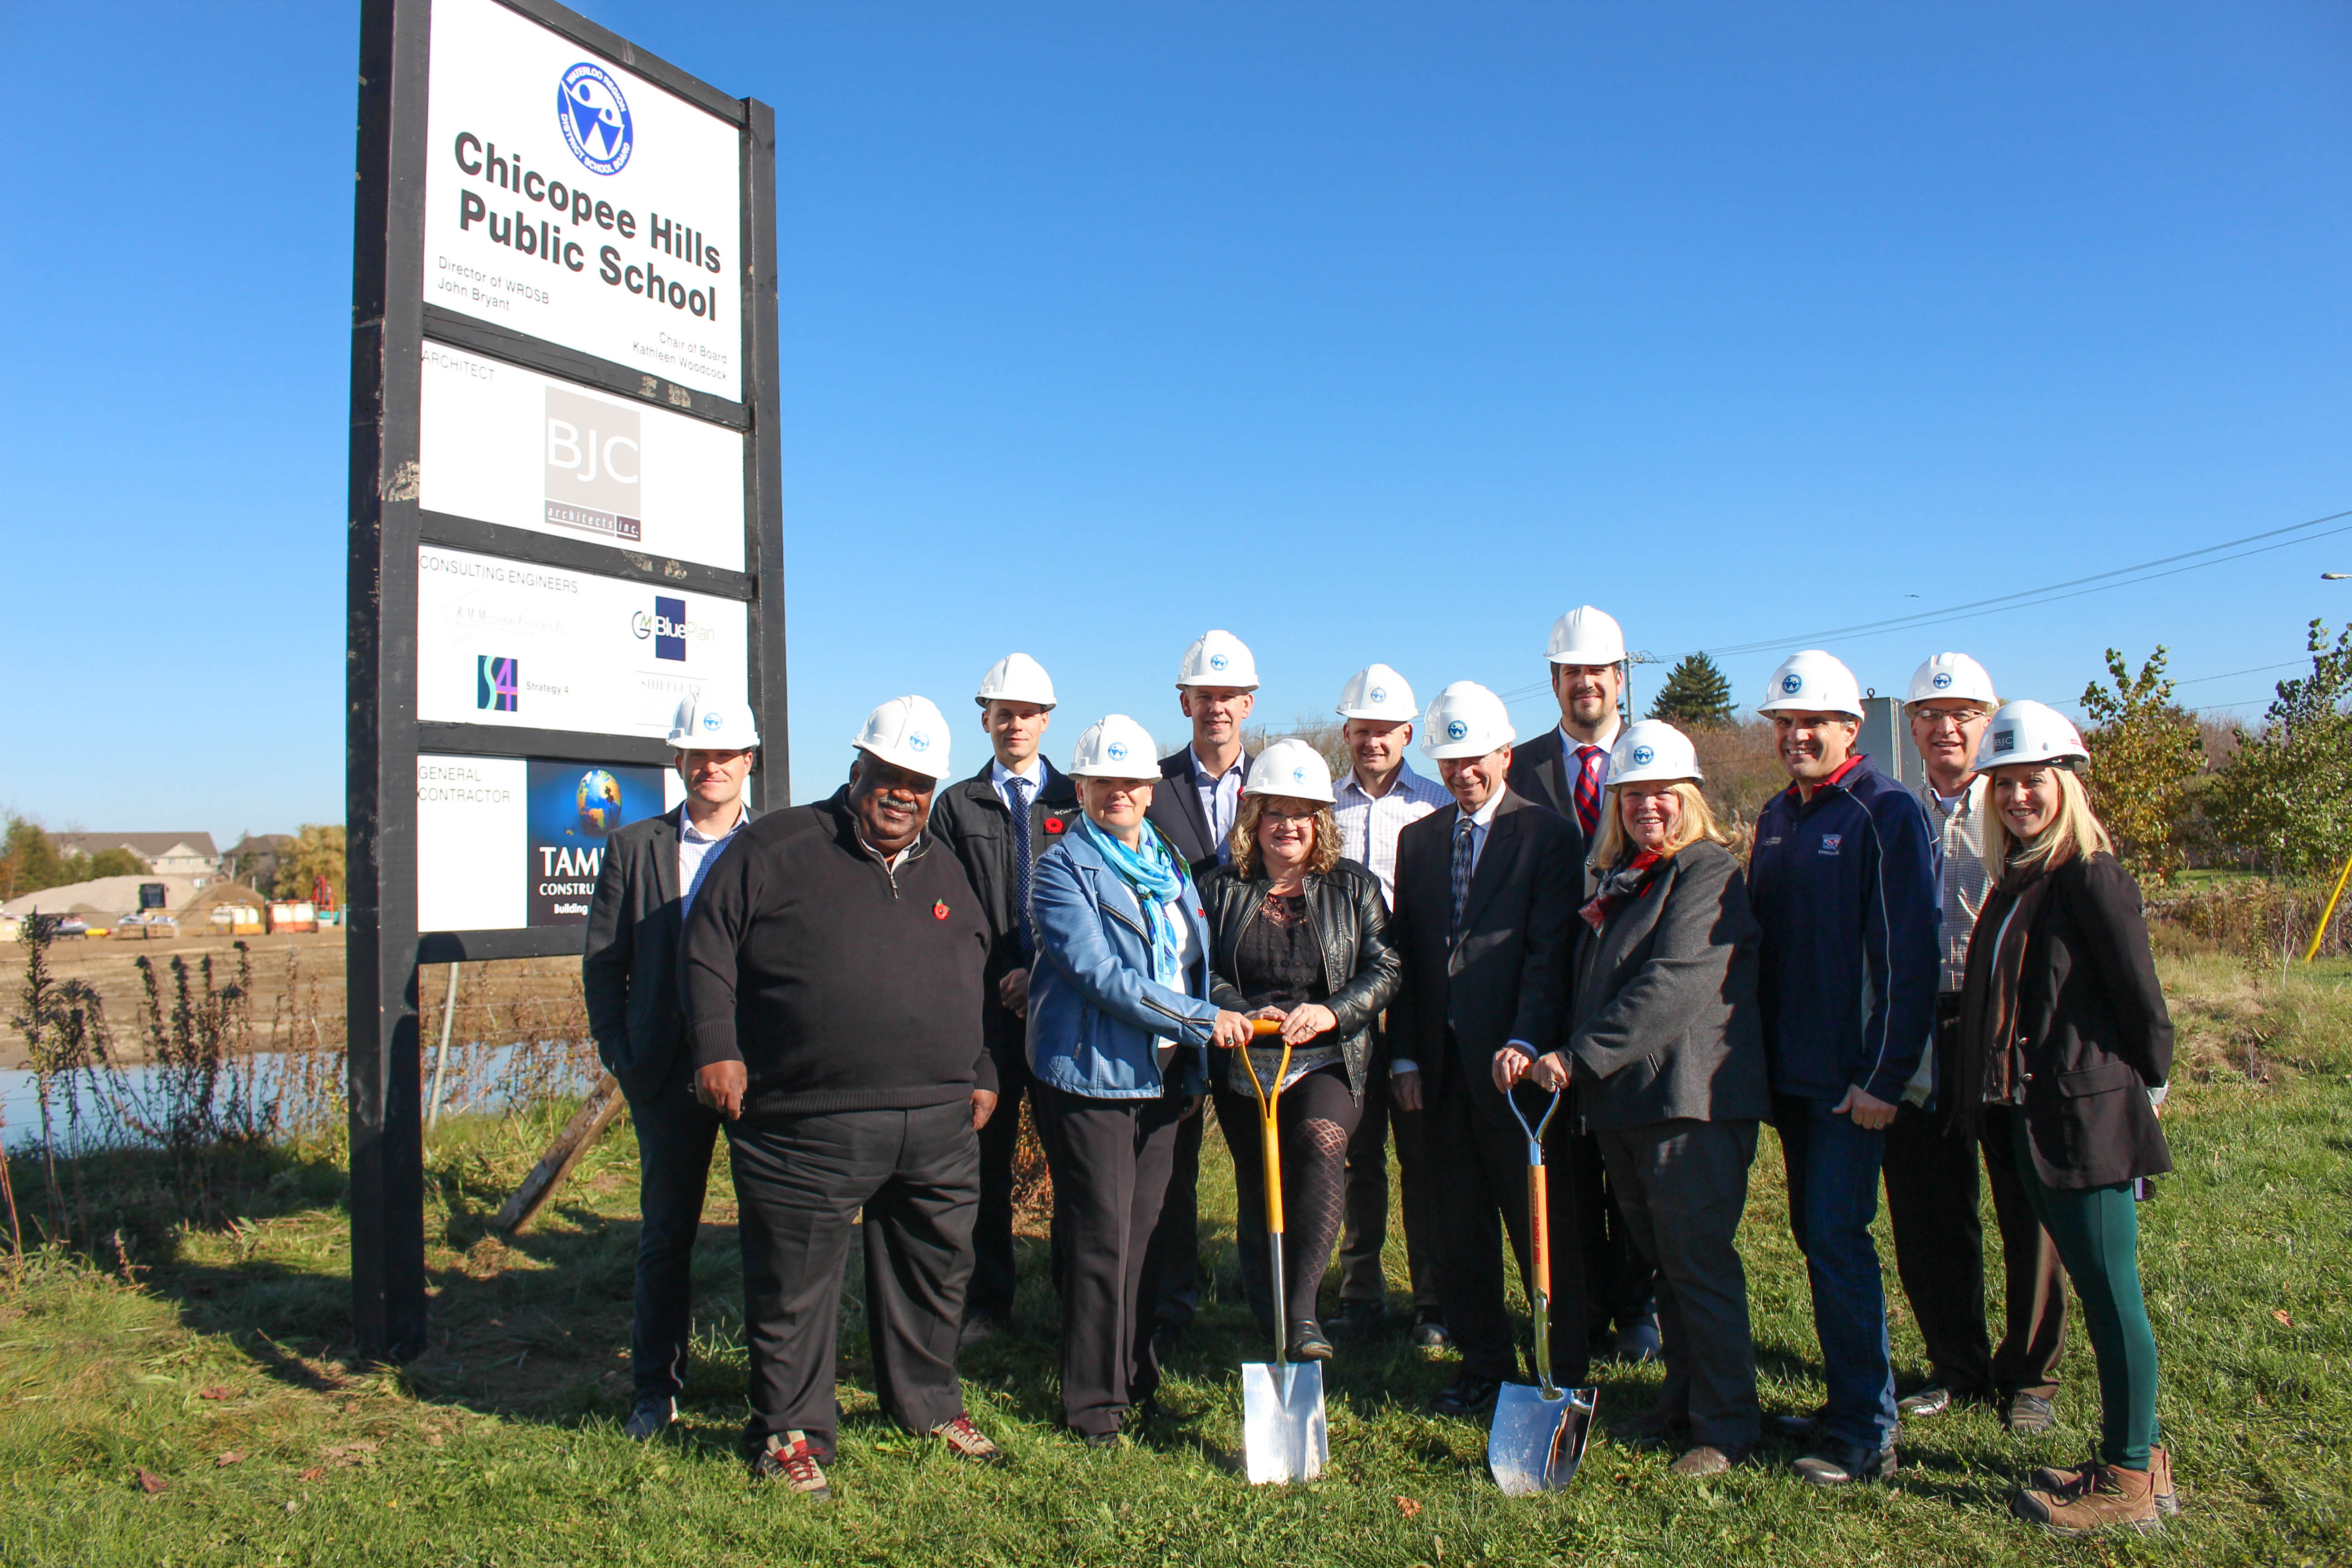 WRDSB trustees and staff turn sod at the groundbreaking ceremony at our newest elementary school site, Chicopee Hills Public School, together with BJC Architects Inc. and Tambro Construction.